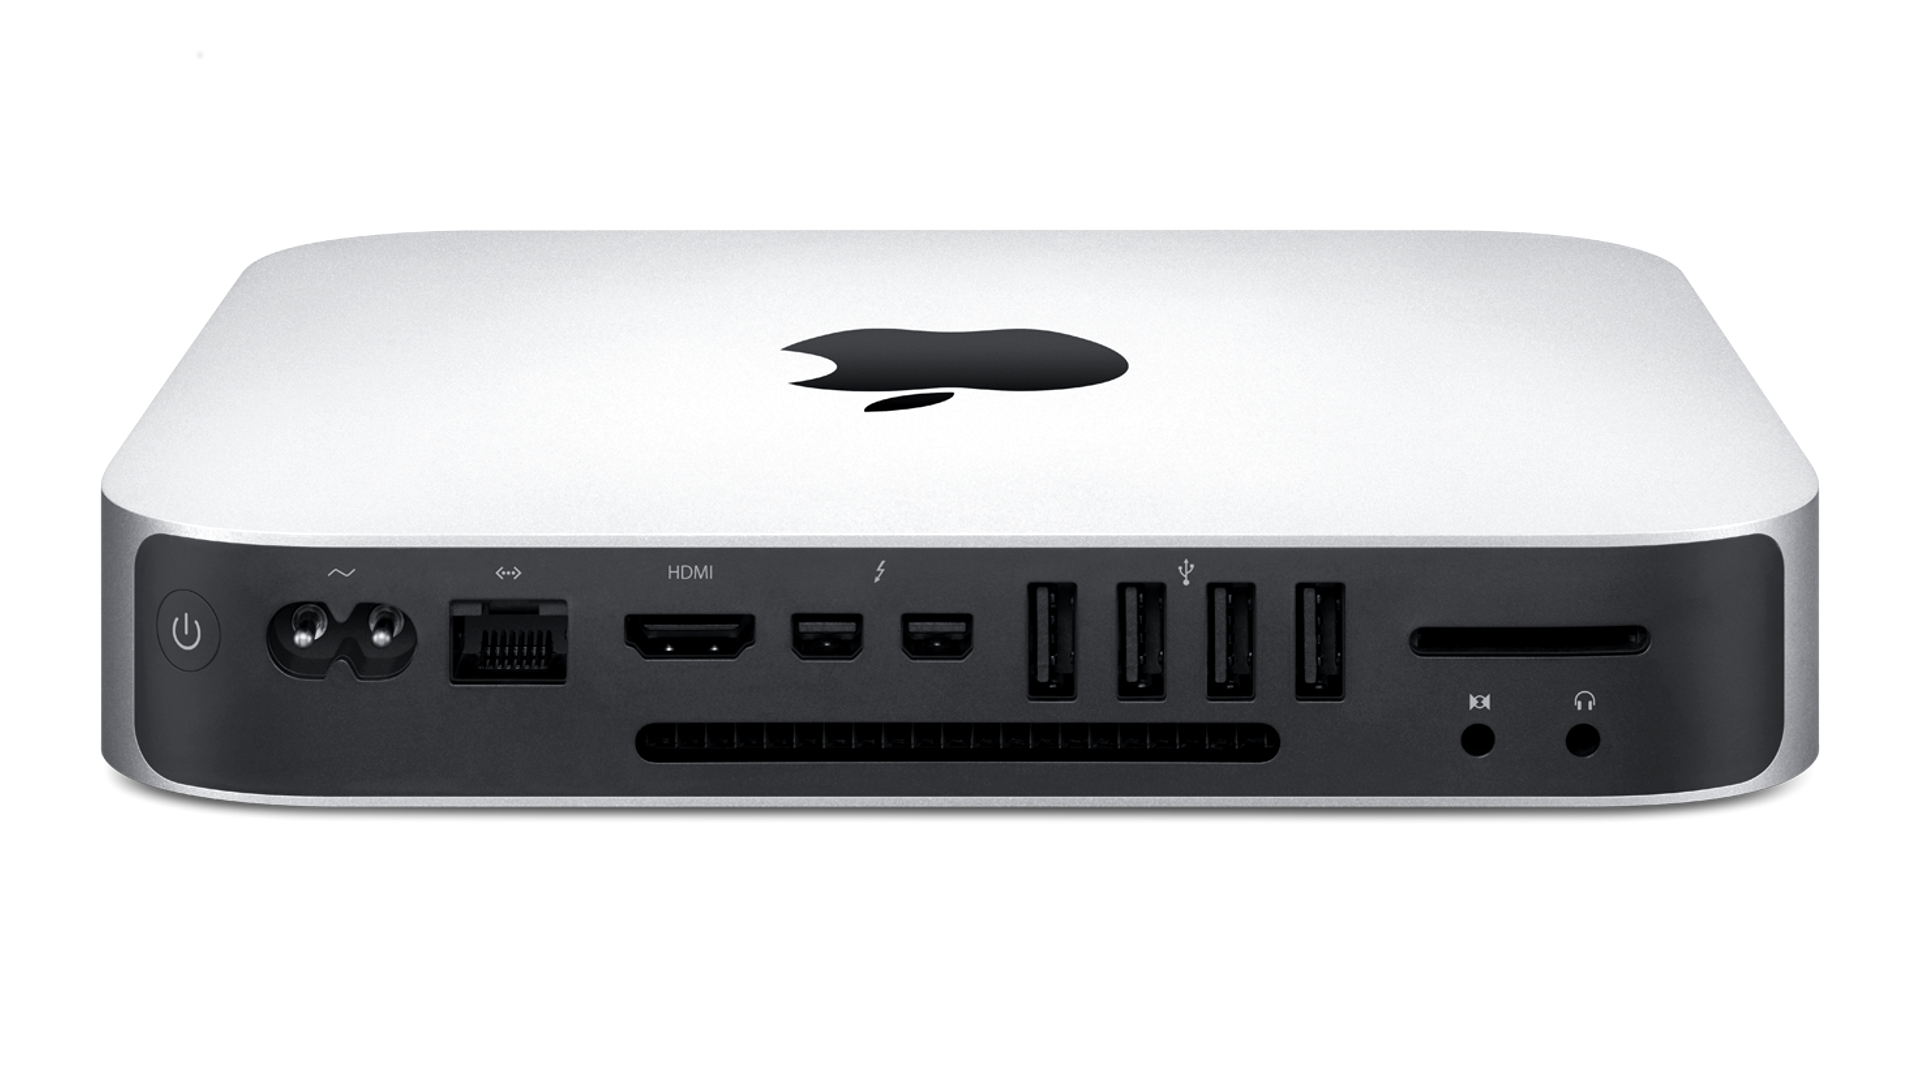 Specifications - Mac mini 2014 review - Page 2 | TechRadar